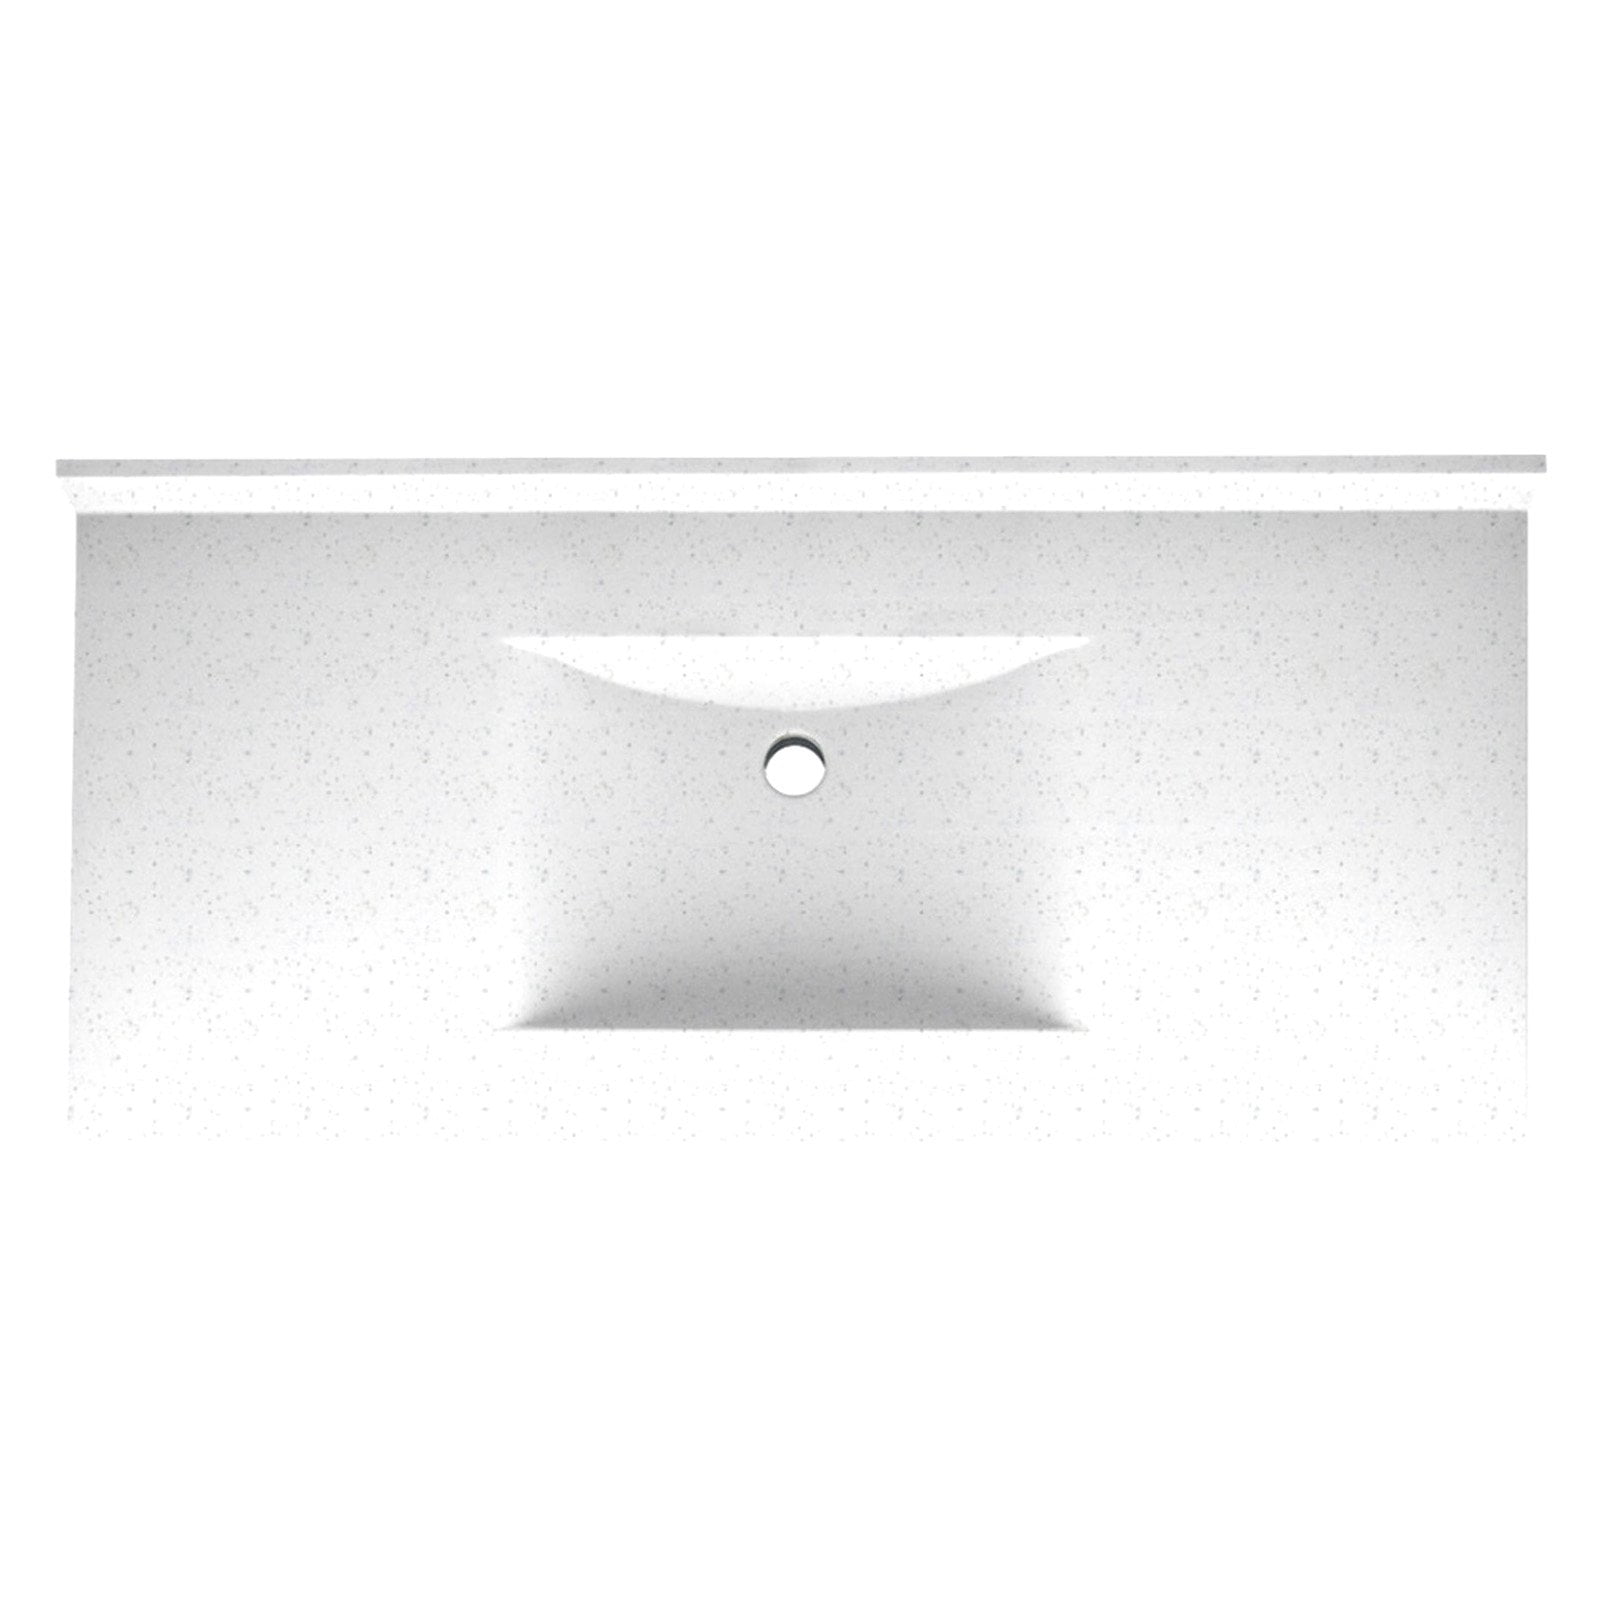 Swanstone 43W x 22D in. Contour Solid Surface Vanity Top